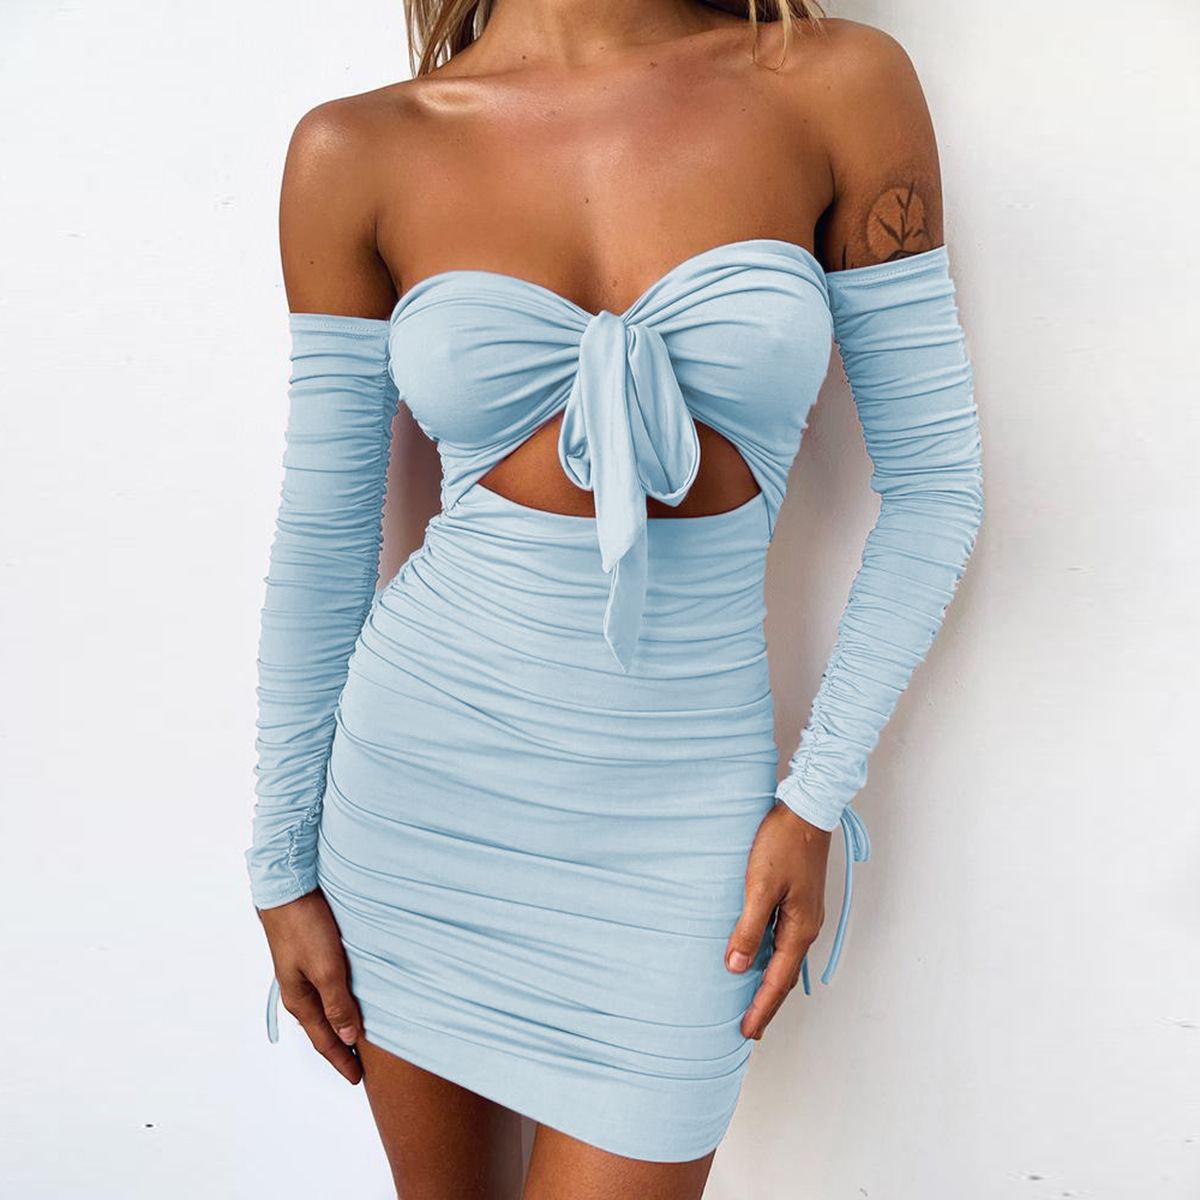 Women's Sexy Wrapped Chest Long Sleeved Dress